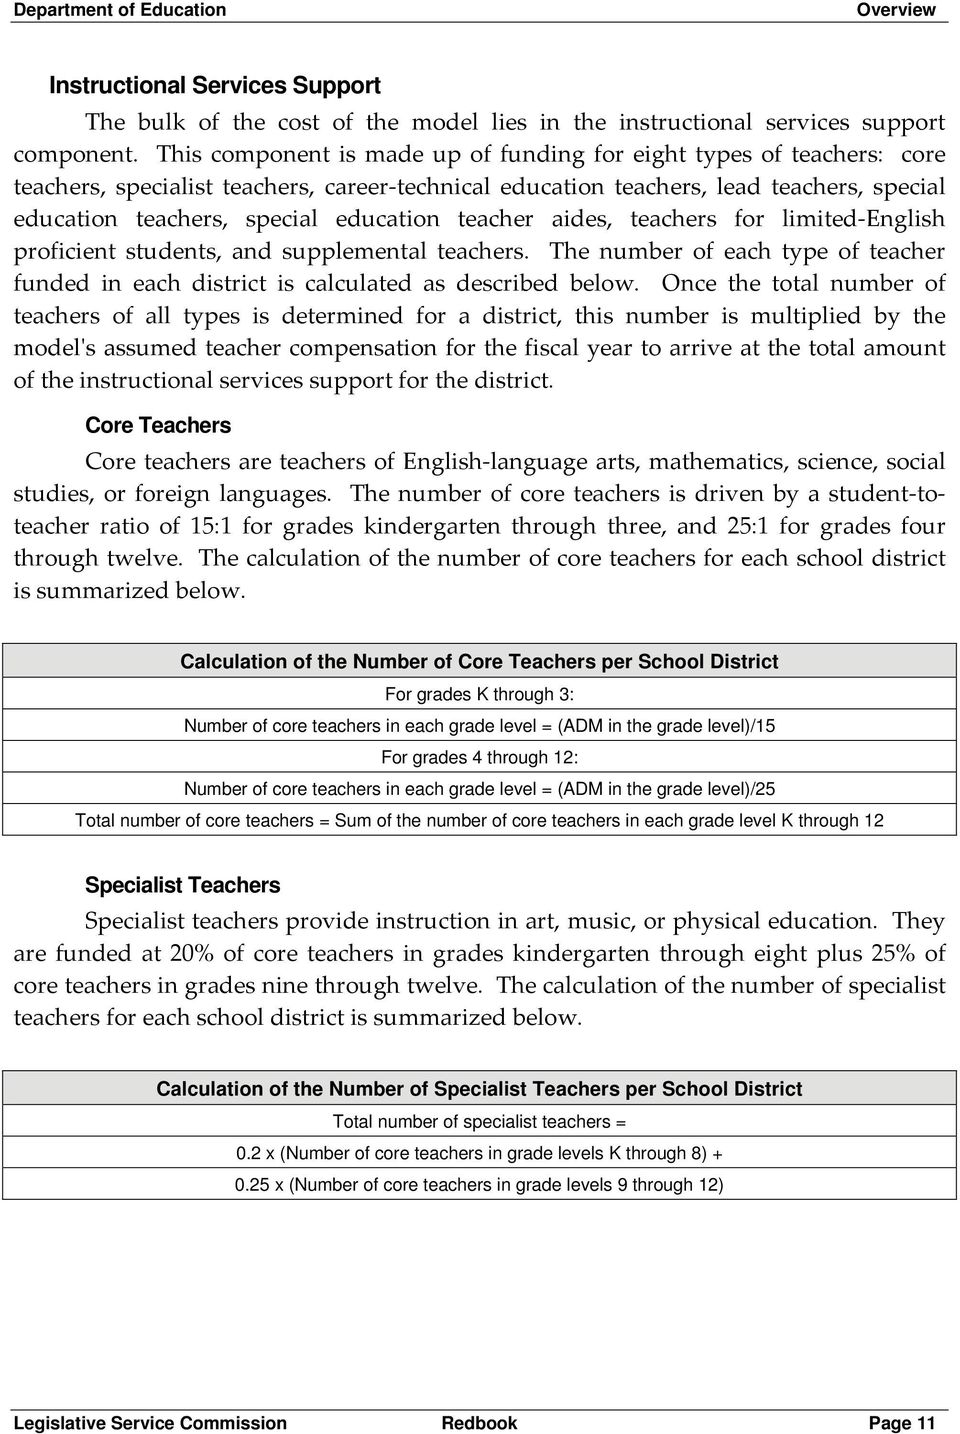 teacher aides, teachers for limited English proficient students, and supplemental teachers. The number of each type of teacher funded in each district is calculated as described below.